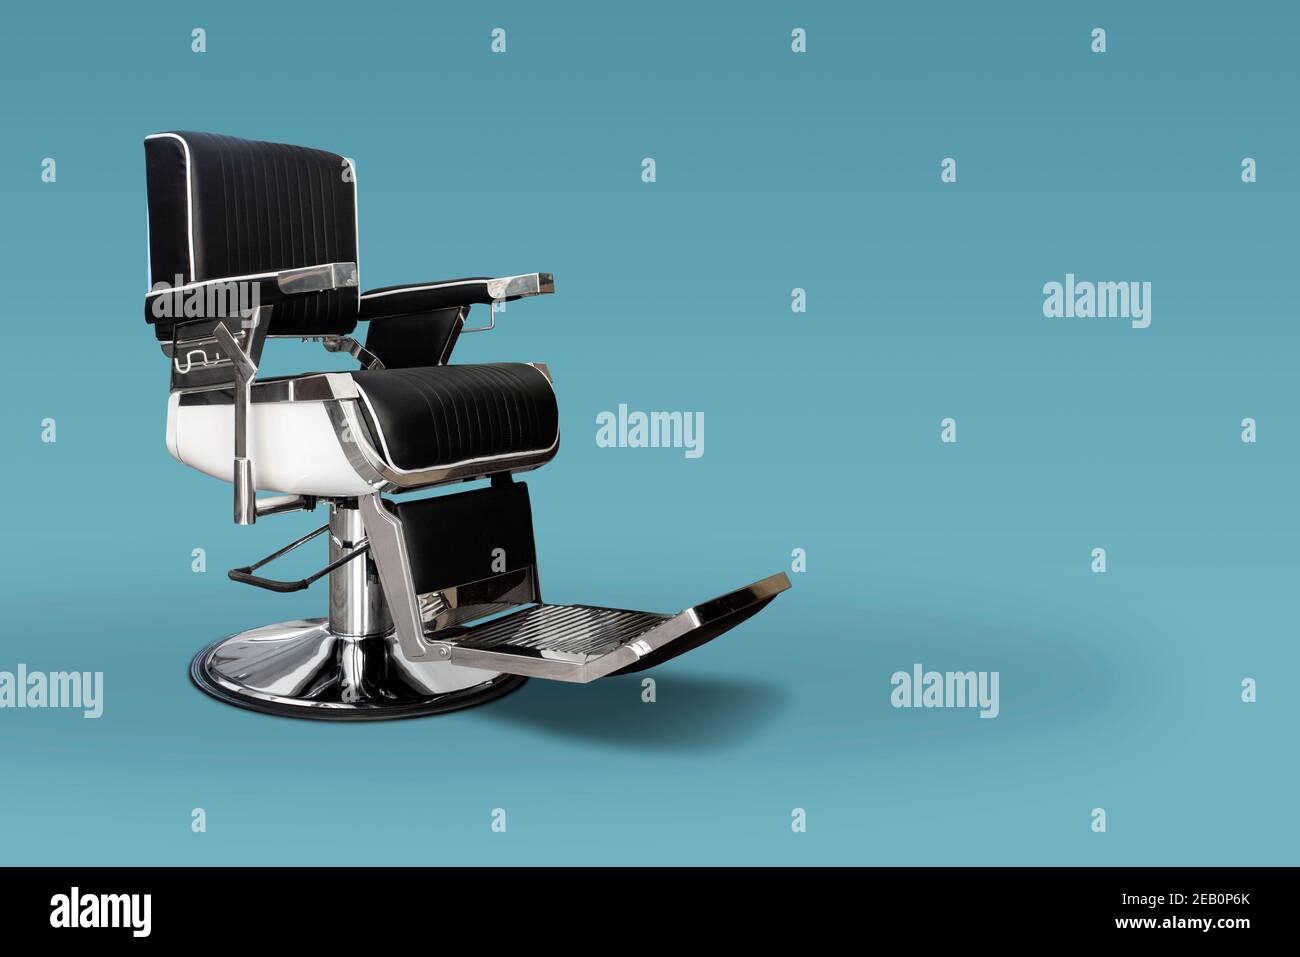 Barber chair with copy space Stock Photo